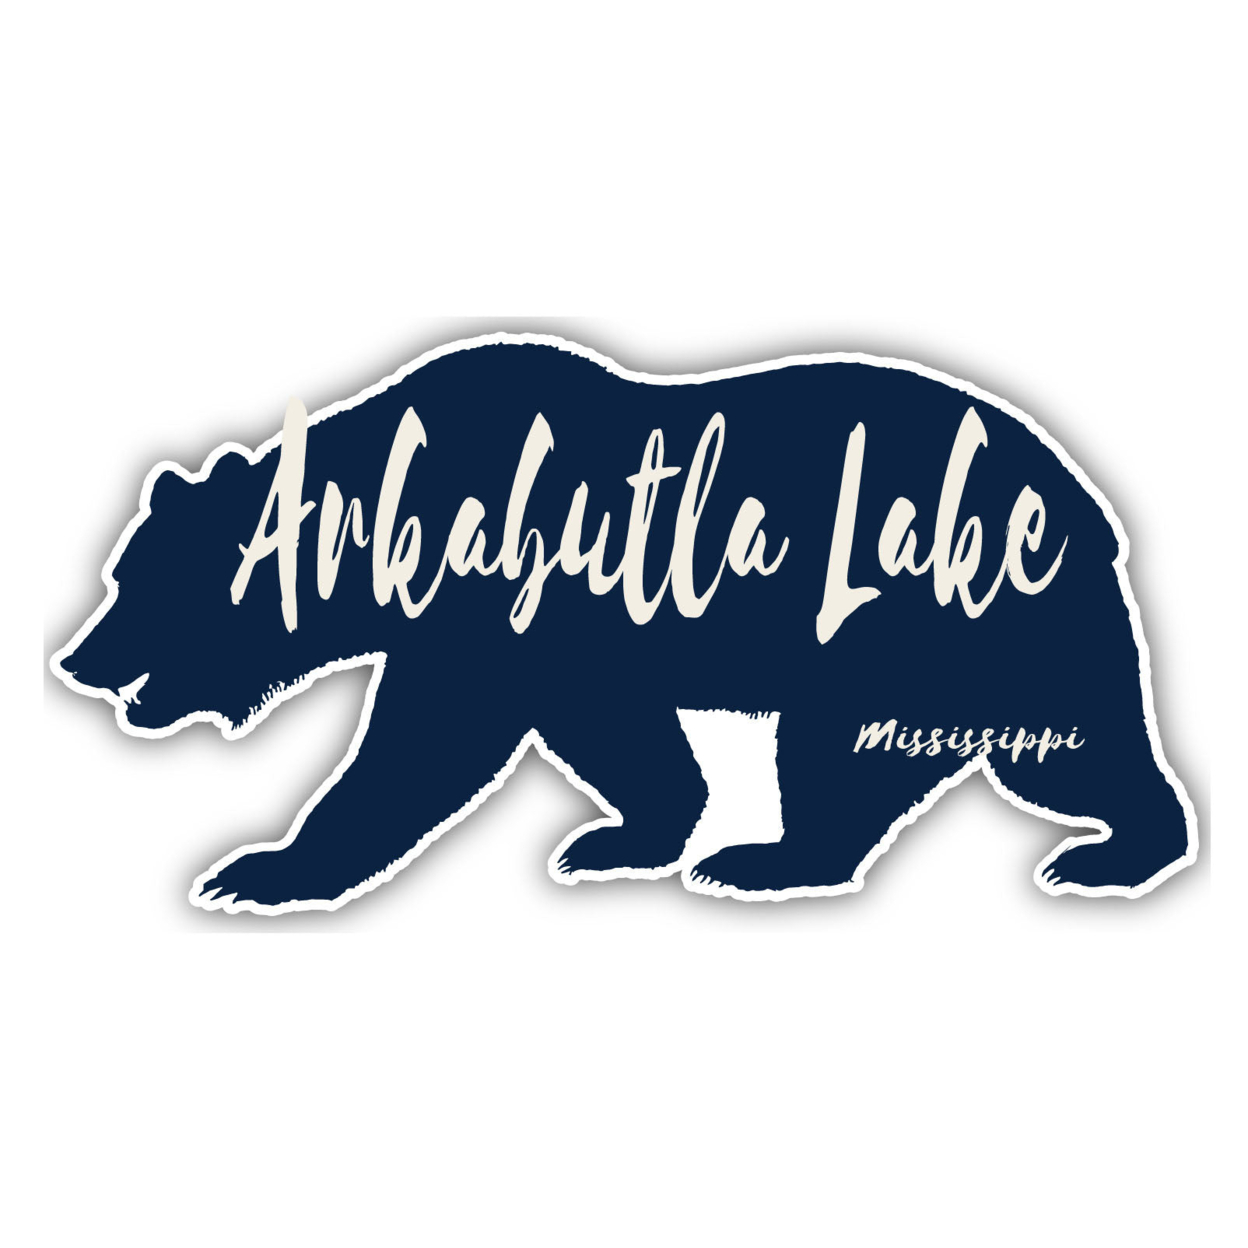 Arkabutla Lake Mississippi Souvenir Decorative Stickers (Choose Theme And Size) - 4-Pack, 2-Inch, Bear